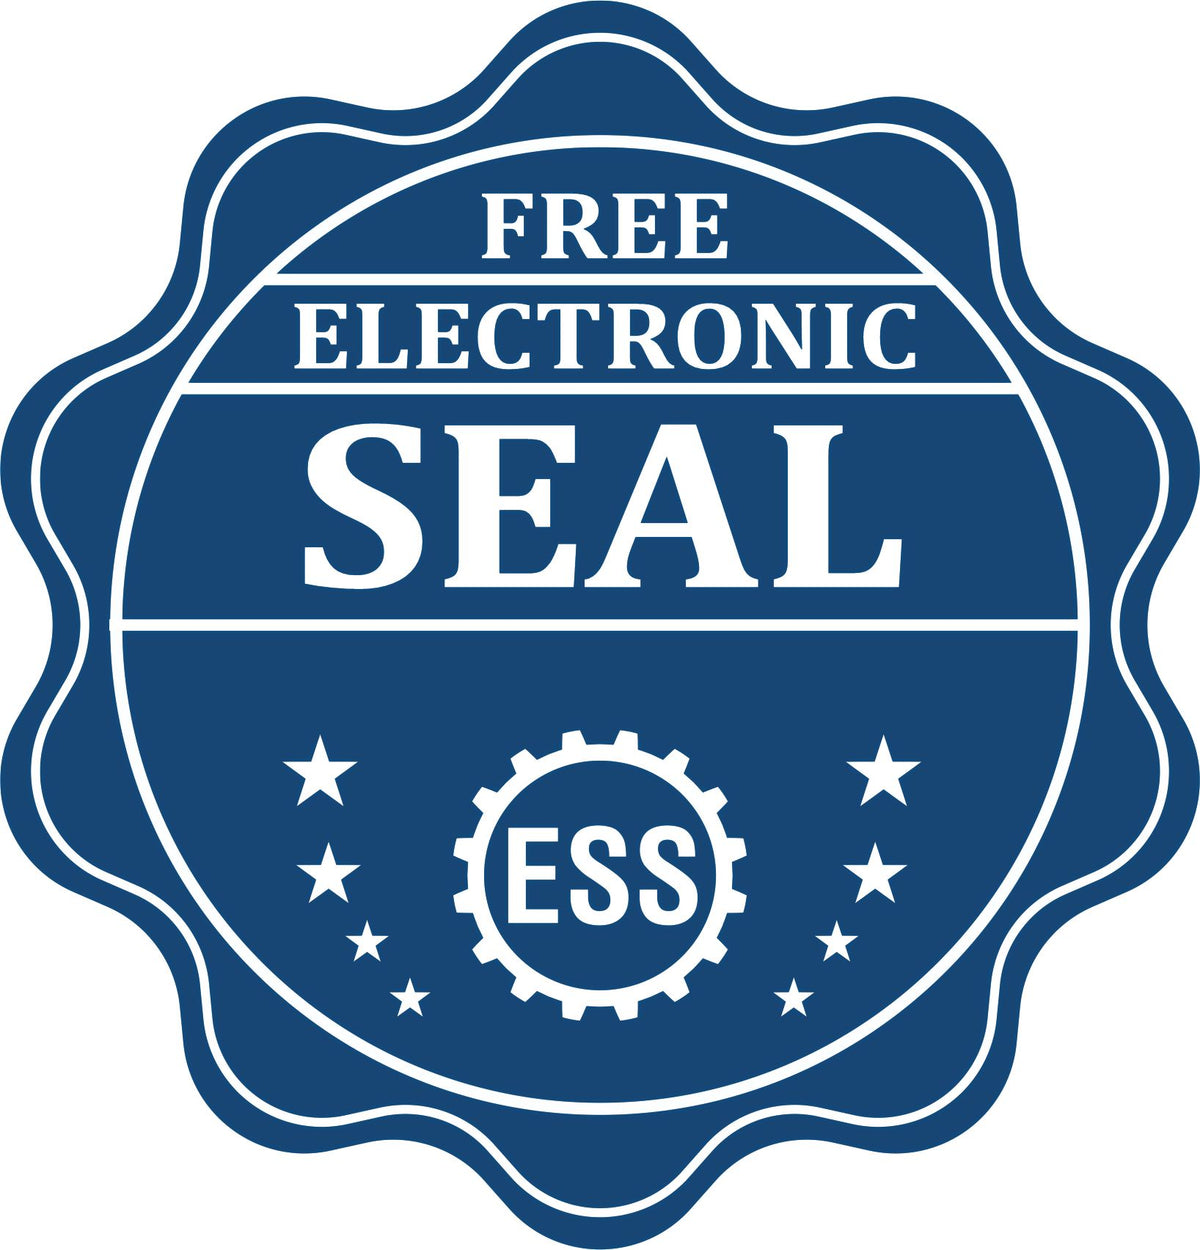 A badge showing a free electronic seal for the MaxLight Premium Pre-Inked Vermont State Seal Notarial Stamp with stars and the ESS gear on the emblem.